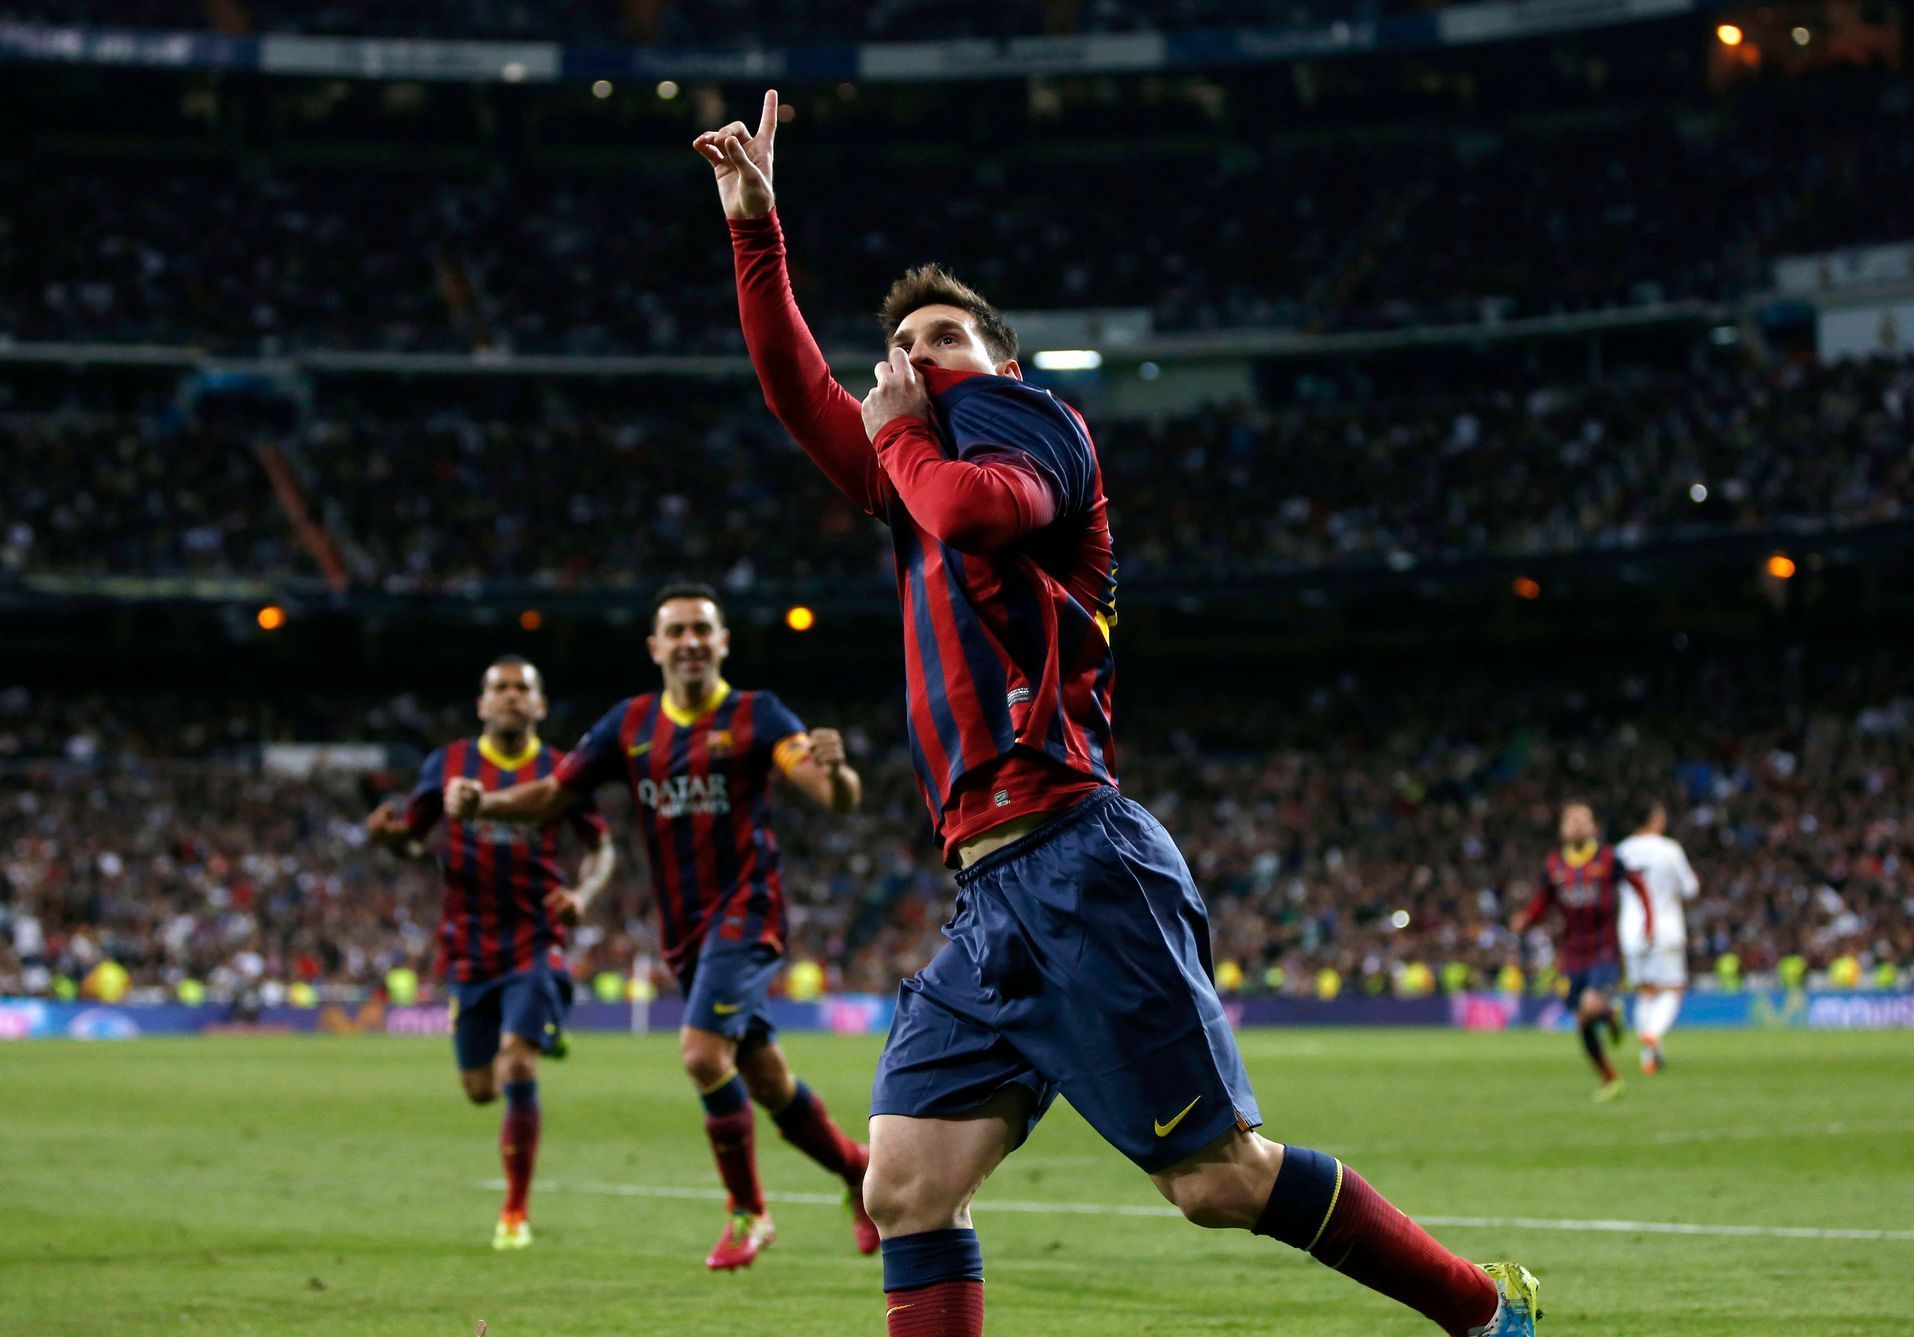 Barcelona's Messi celebrates after scoring a penalty goal against Real Madrid during La Liga's second 'Clasico' soccer match of the season in Madrid